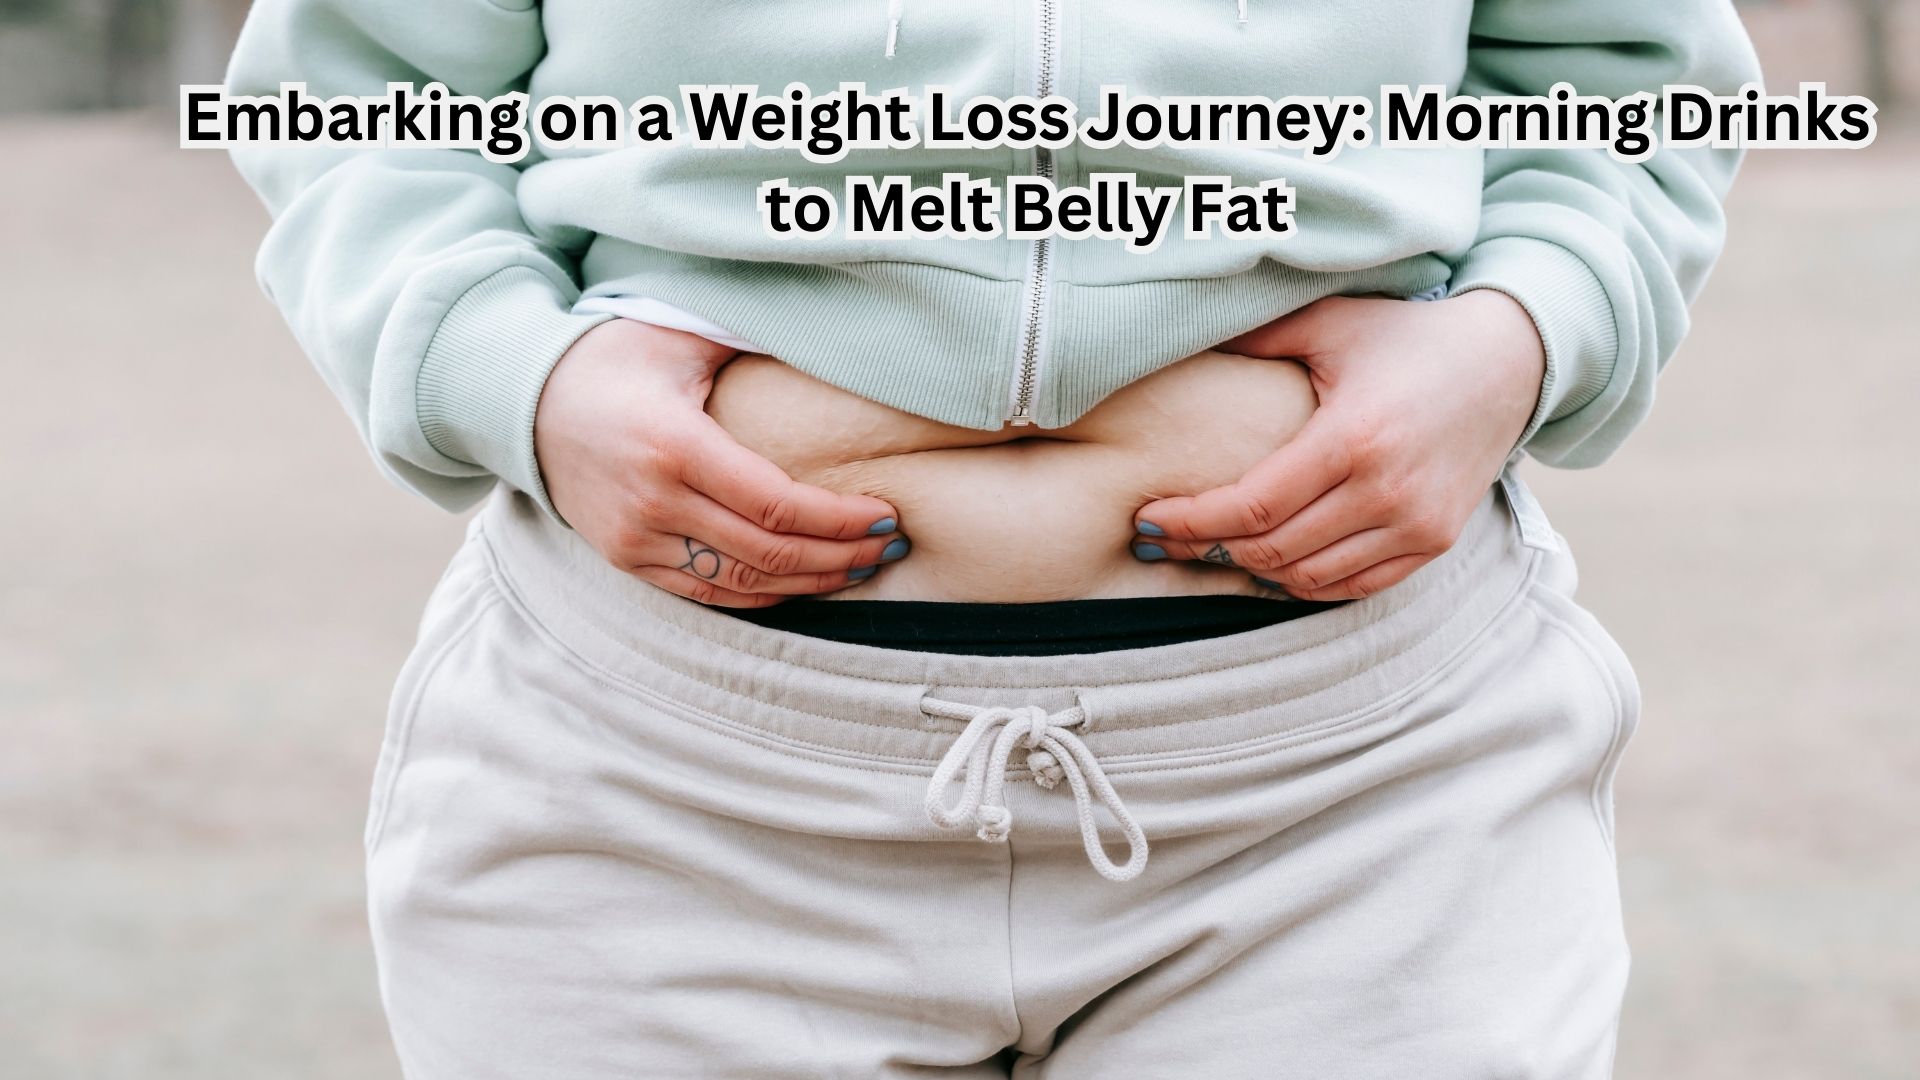 Embarking on a Weight Loss Journey: Morning Drinks to Melt Belly Fat